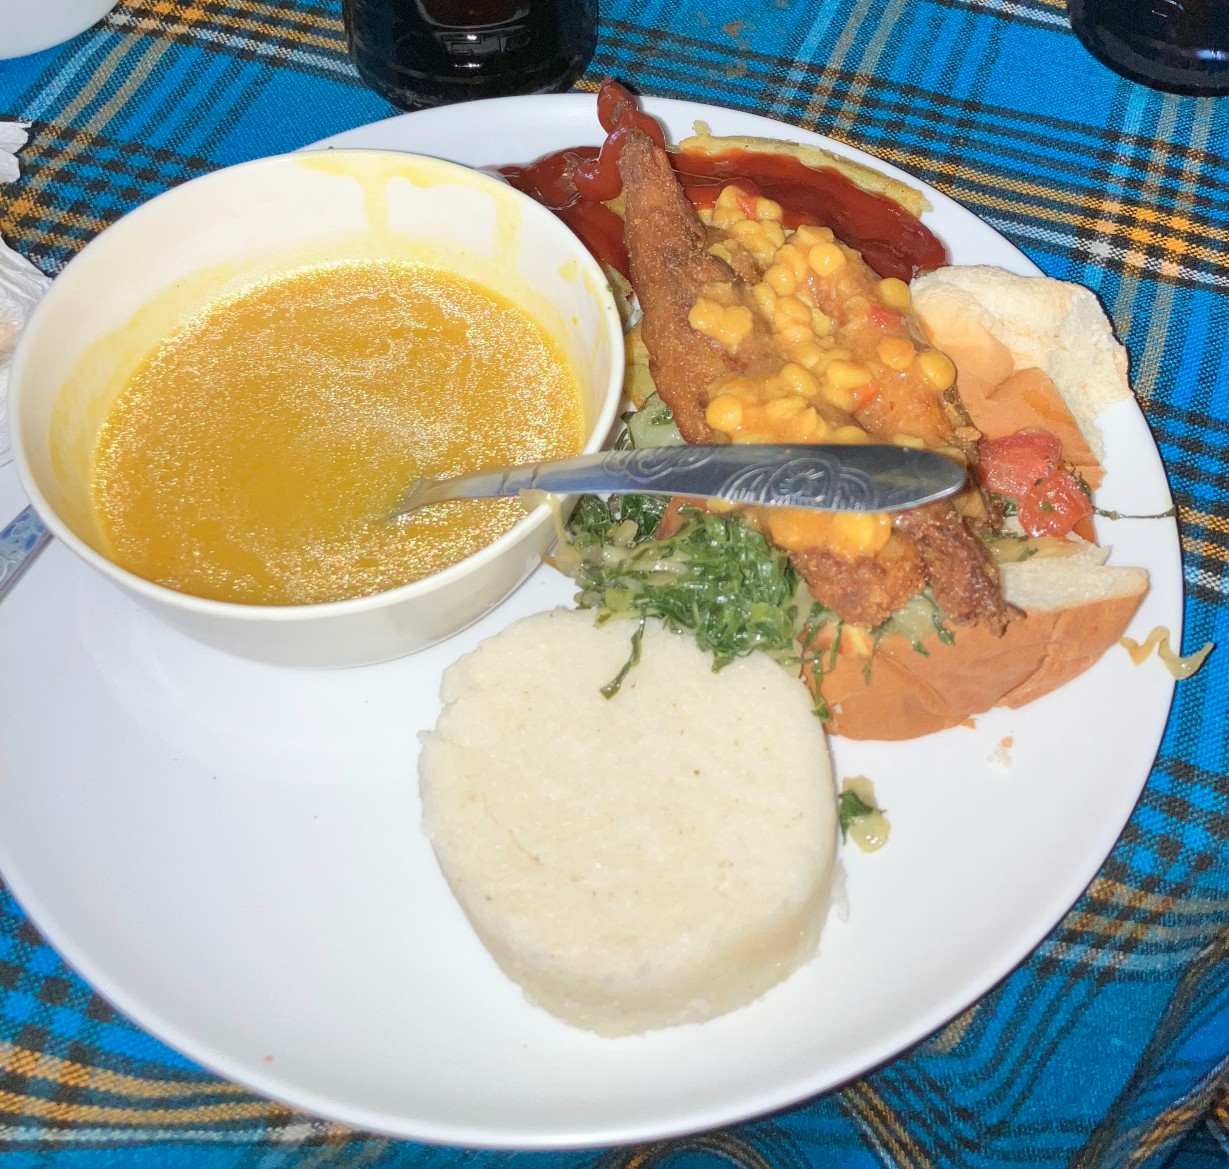 A meal eaten during the trip.